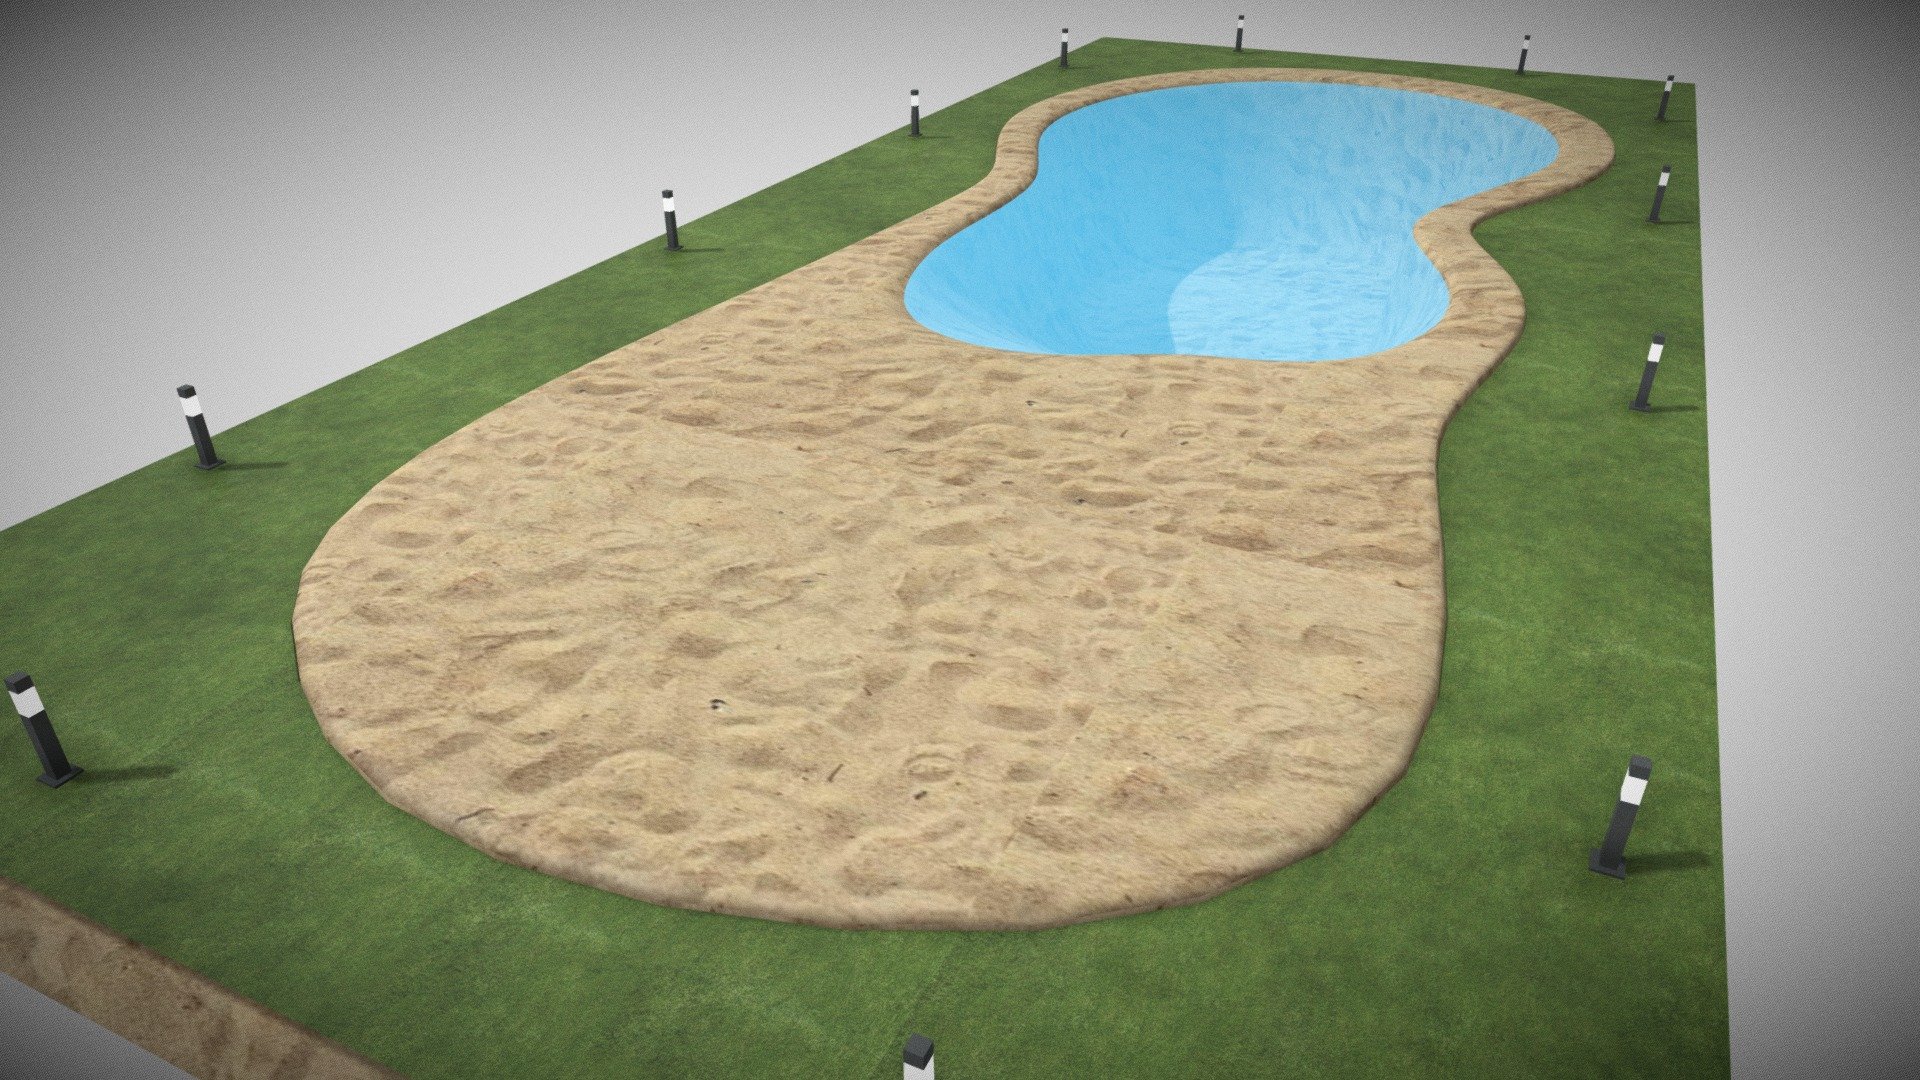 The natural beach pool can be an impressive element for your projects. low polygon, realistic finish, easy to use 3d model